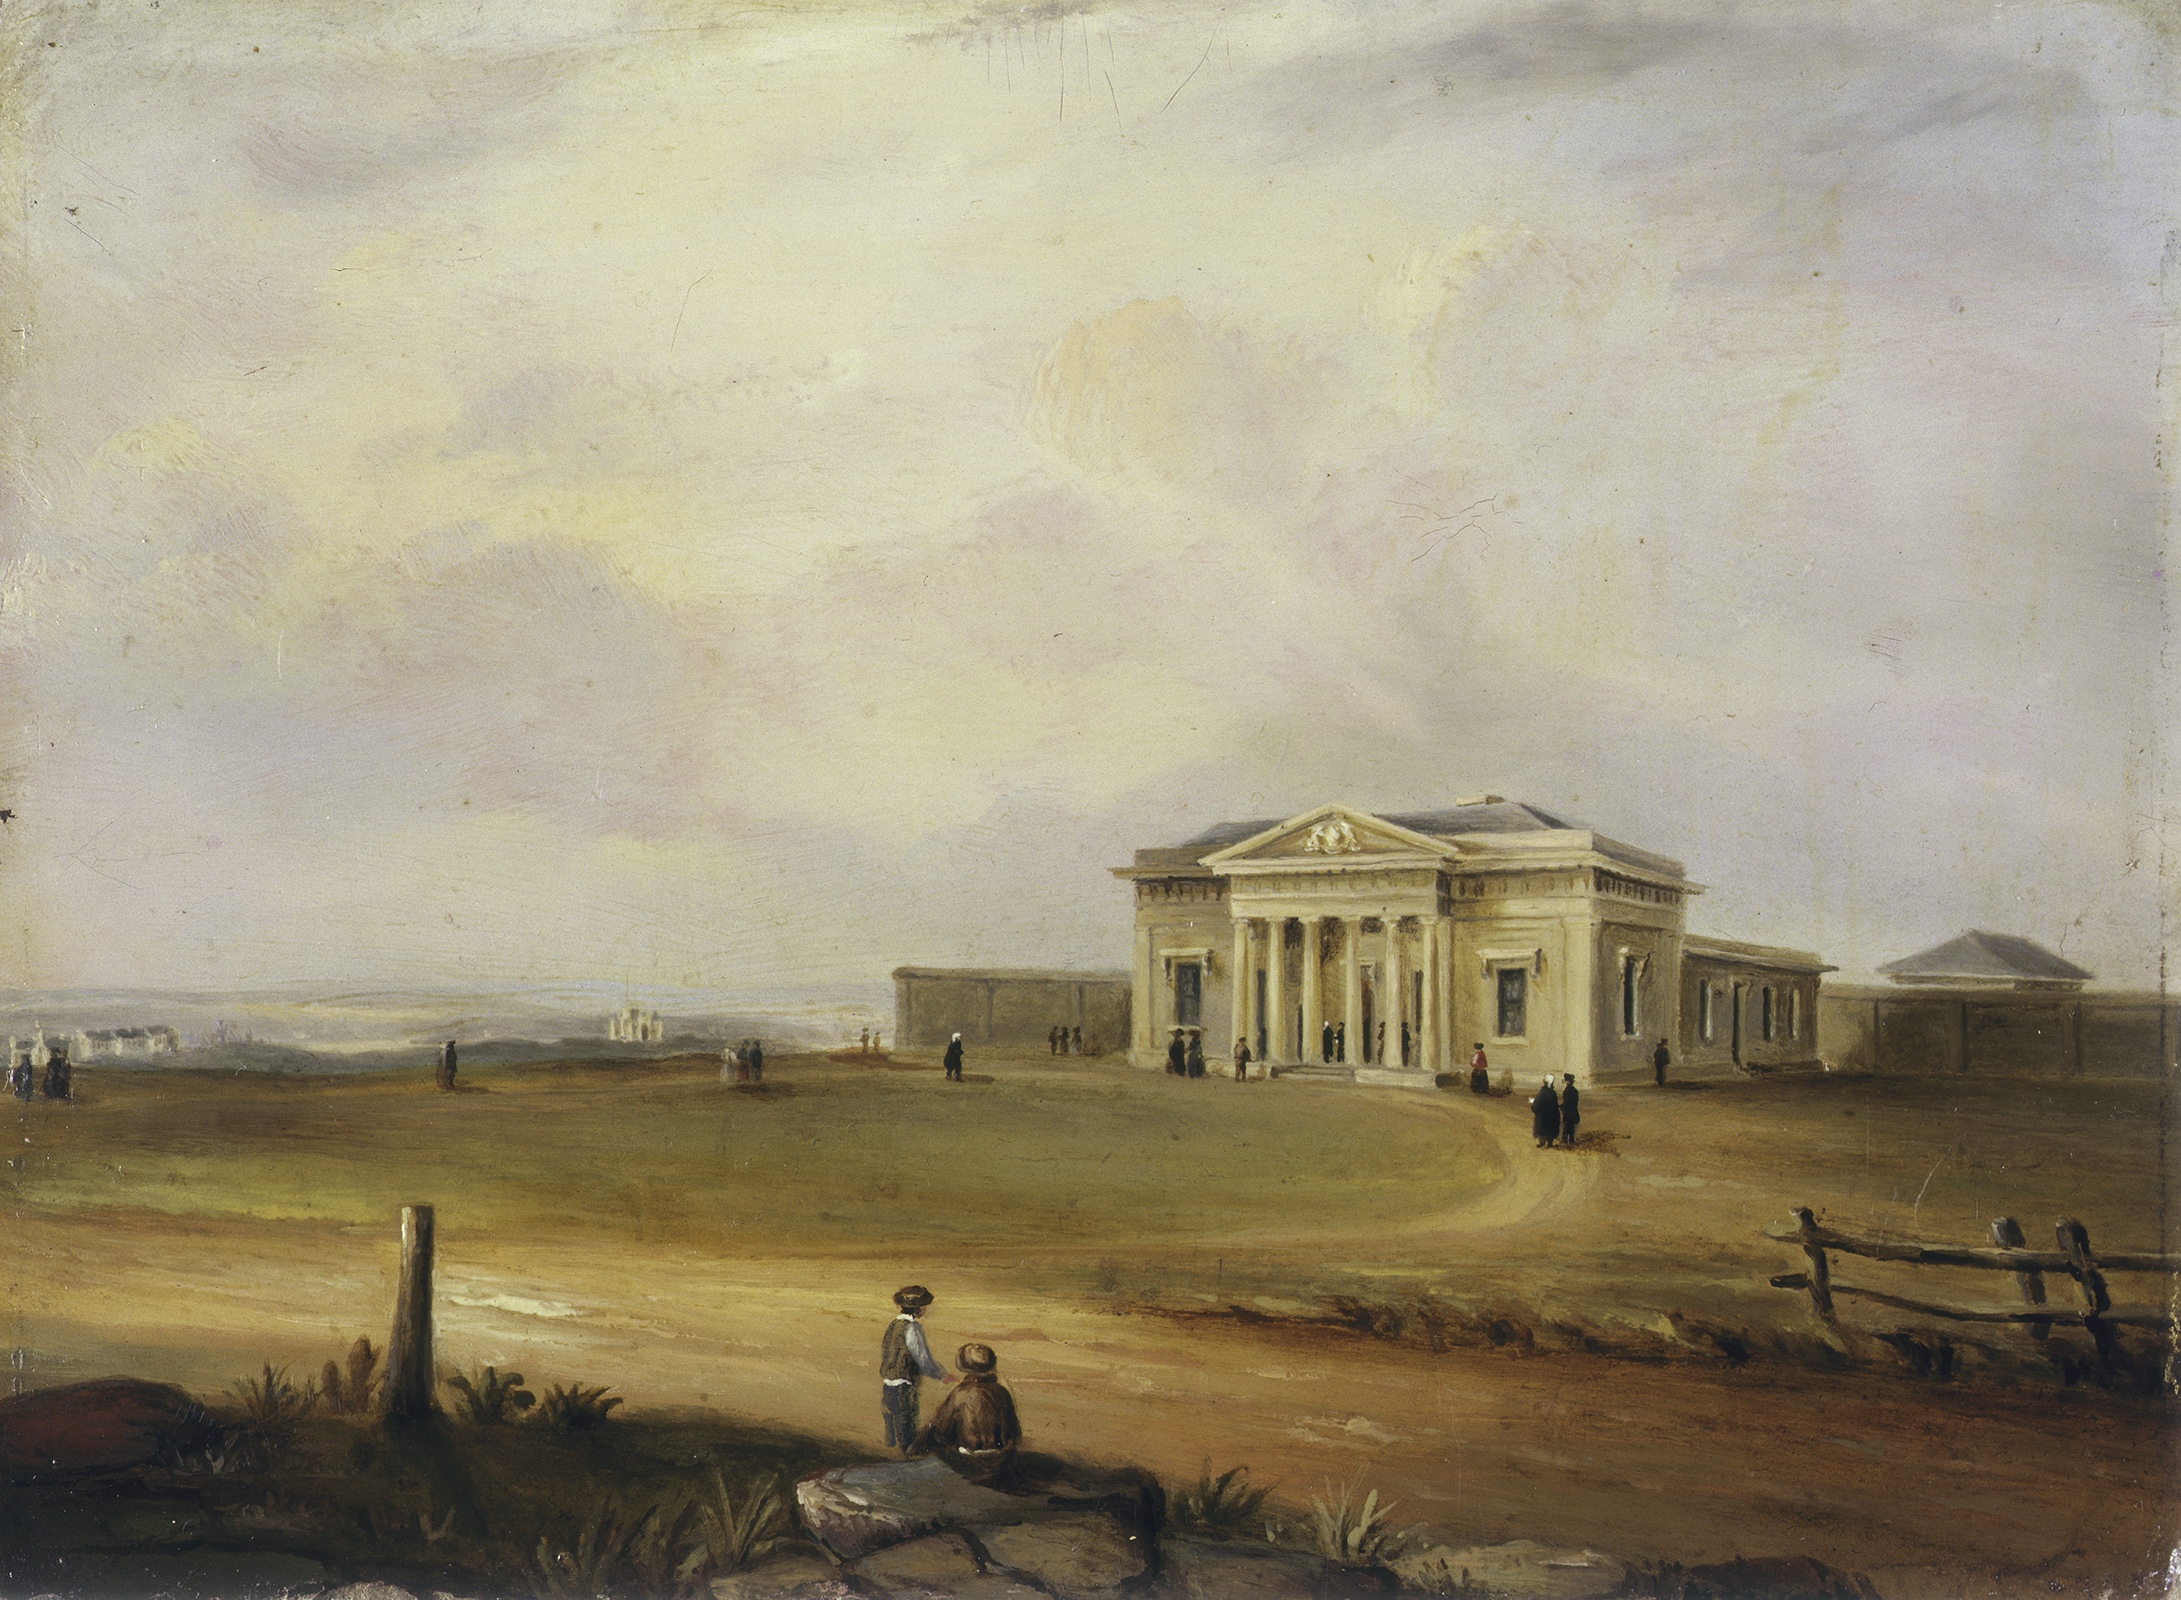 Oil painting of a grand sandstone building with various people on the forecourt including a wigged solicitor. In the background, two other large buildings appear on the otherwise empty country landscape.